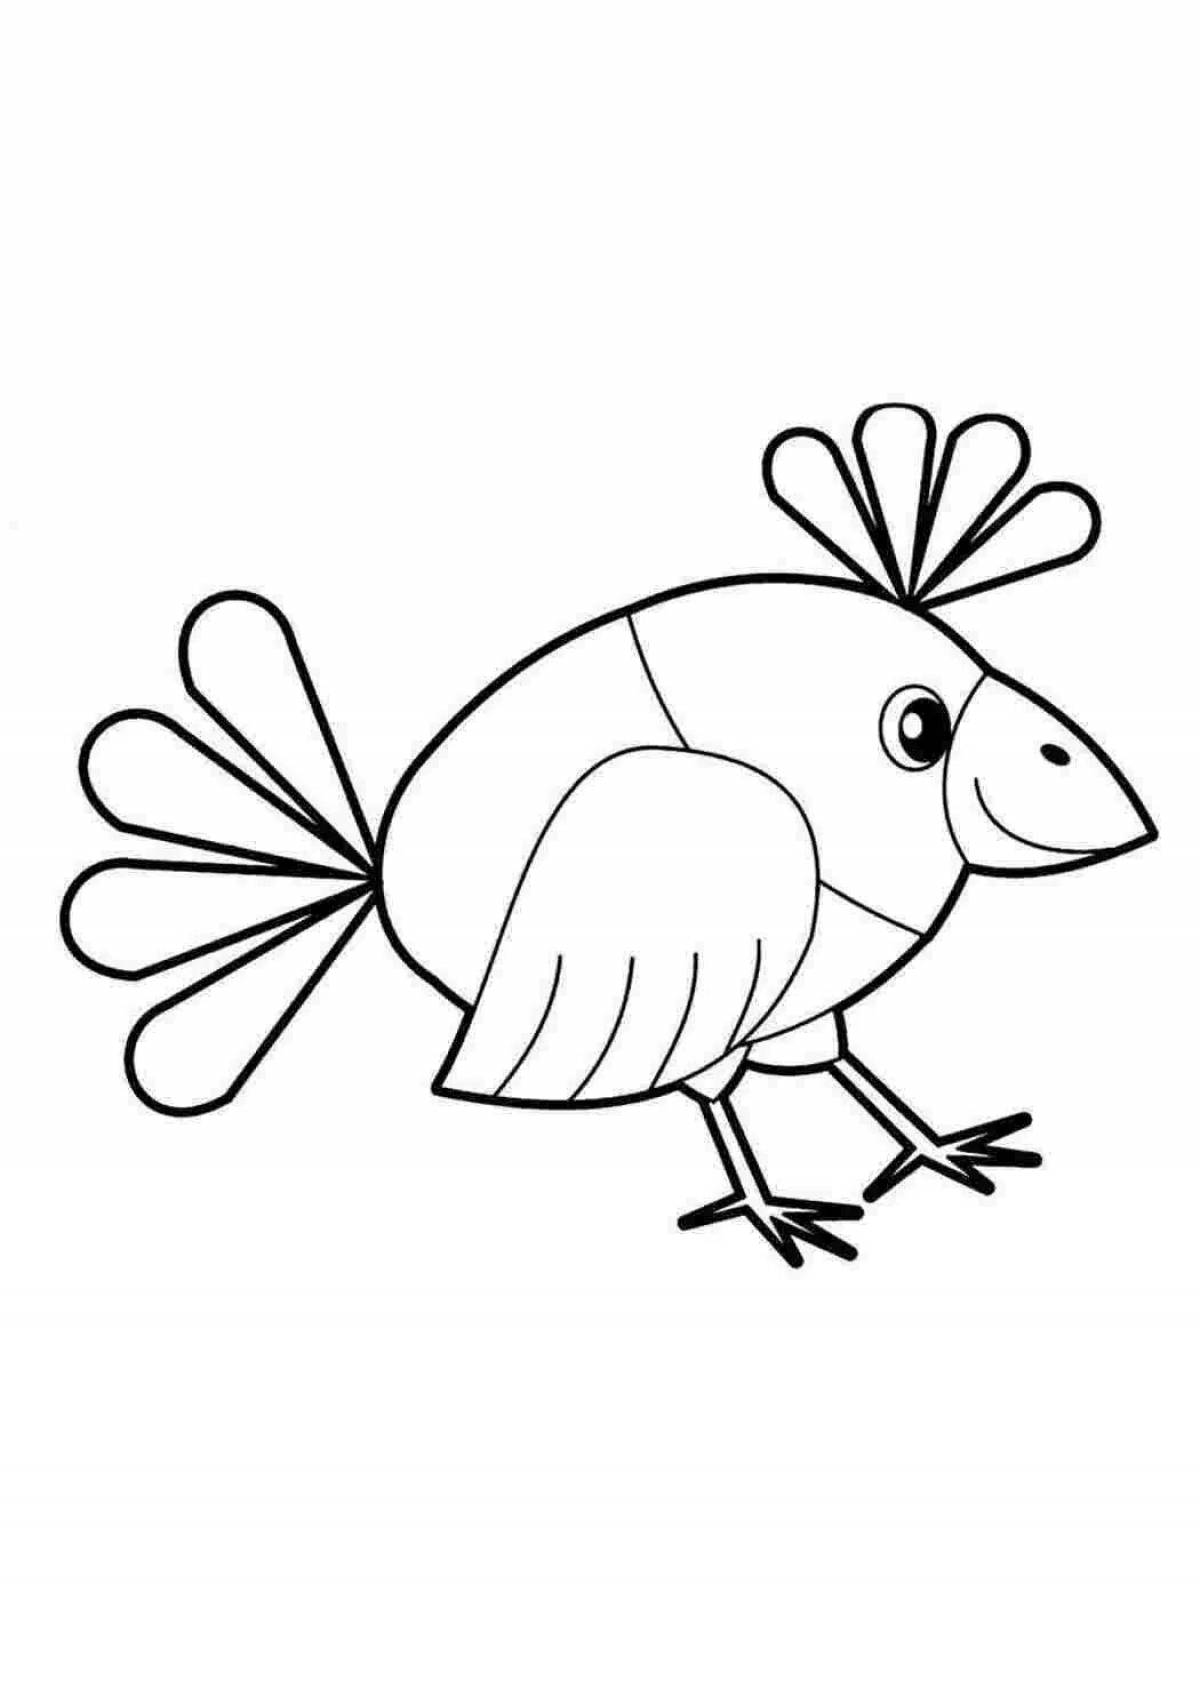 Animal coloring pages for children 2-3 years old